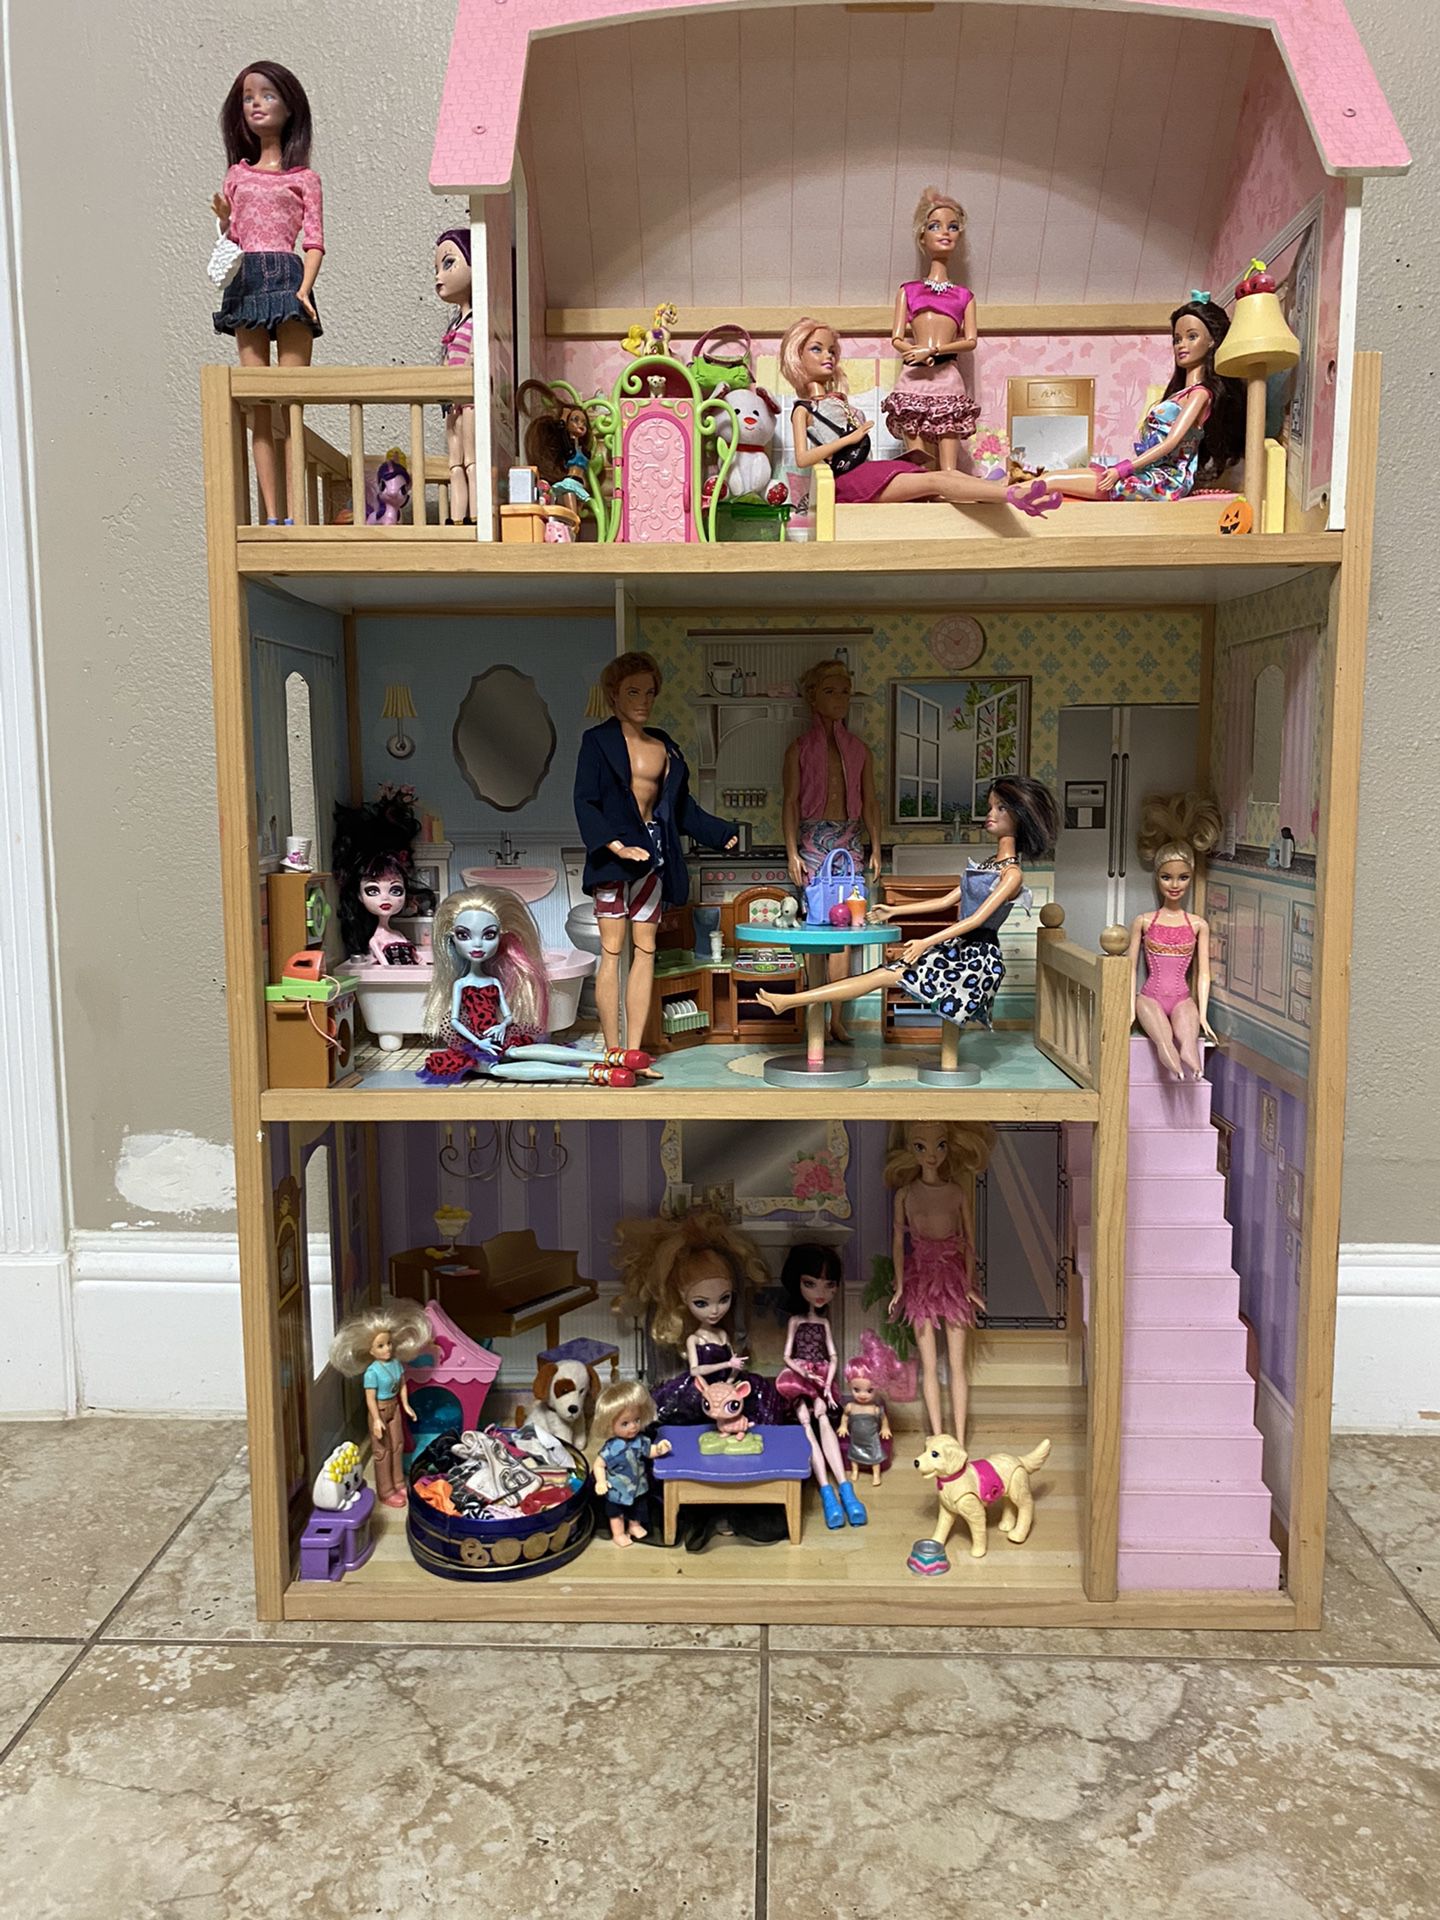 Big Doll House comes with all the Barbies & accessories. I used it when I was little but now I’m selling it , it’s in a good condition ...works good